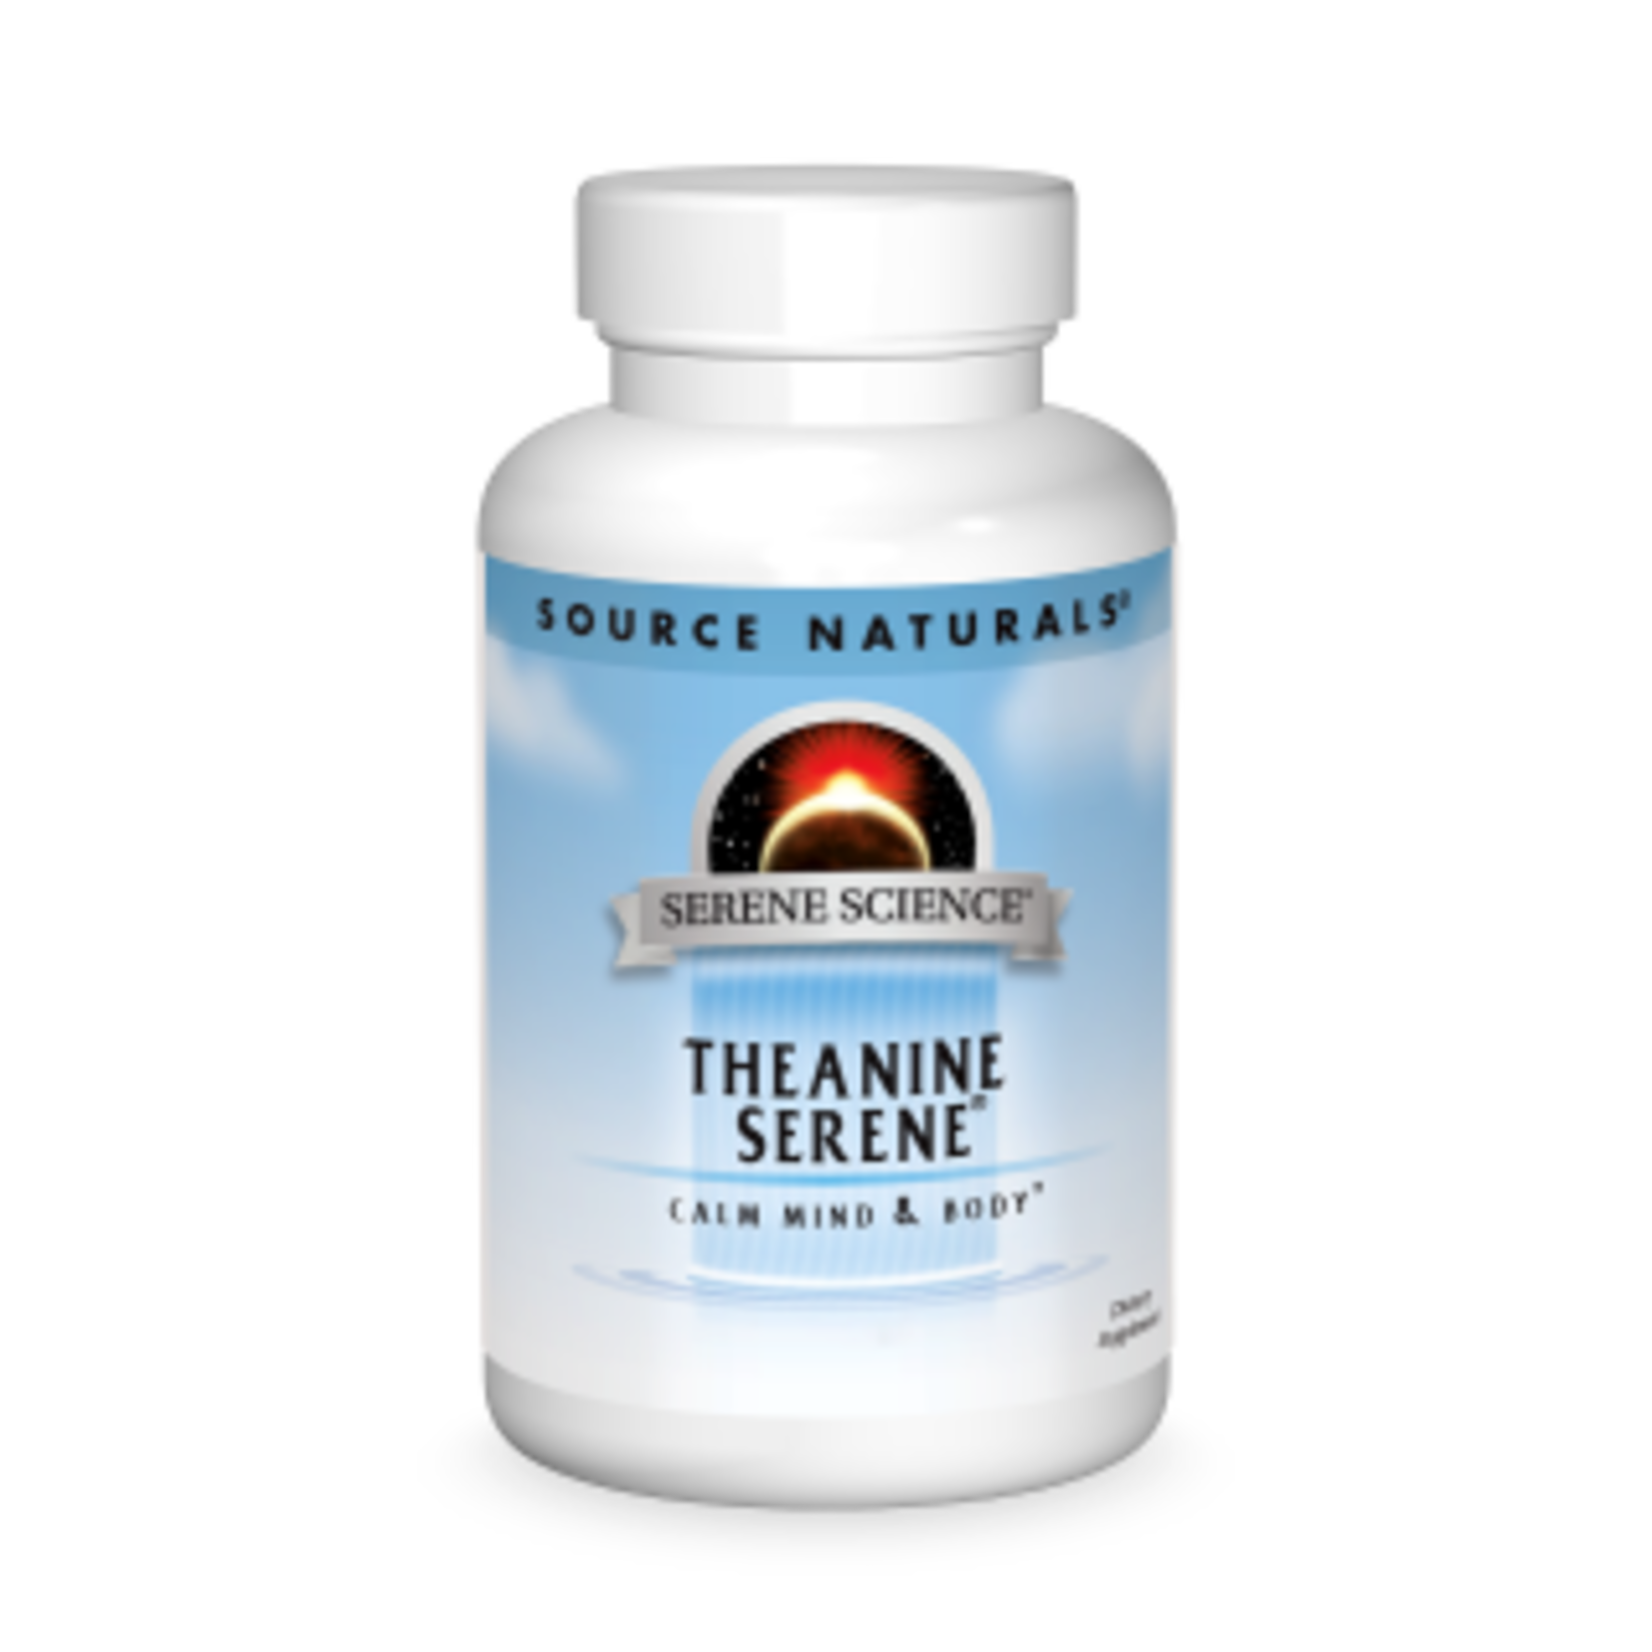 Source Naturals Source Naturals - Theanine Serene - 30 Tablets